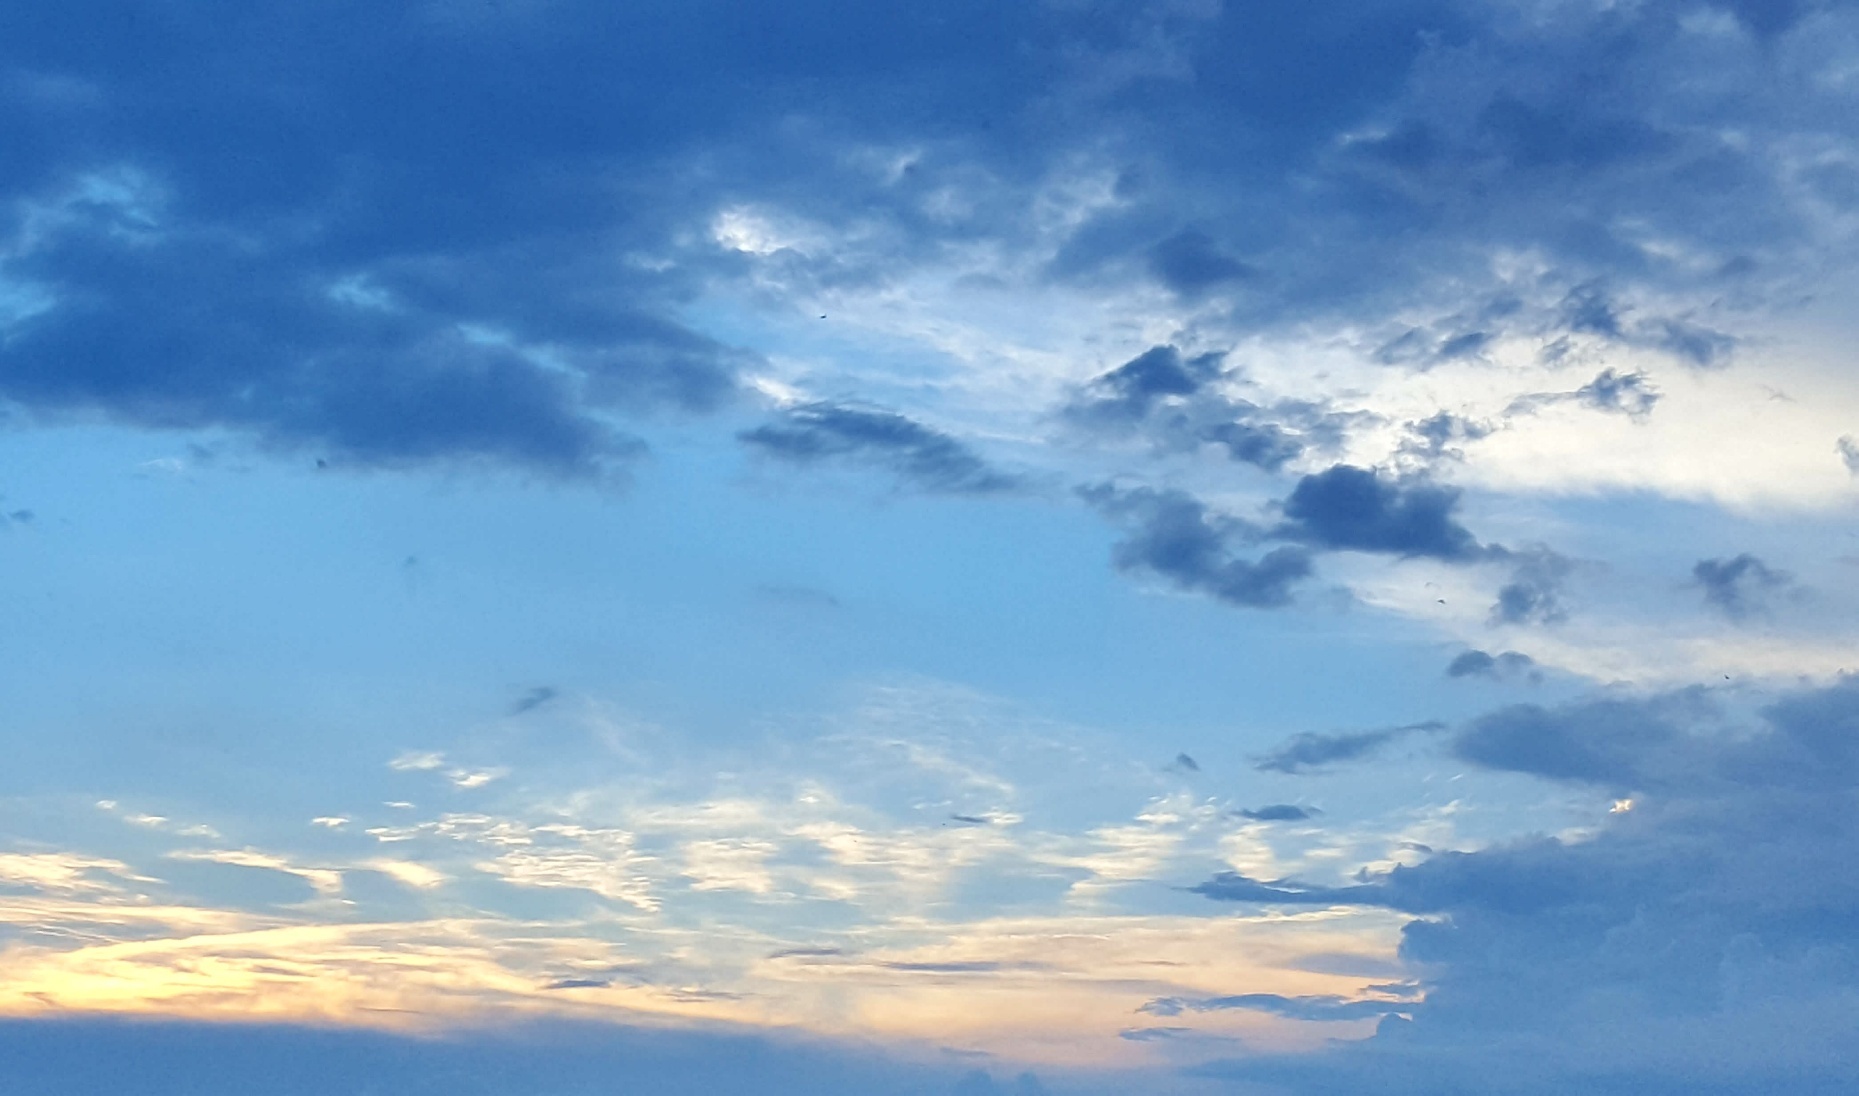 20190718upintheClouds_resized.jpg